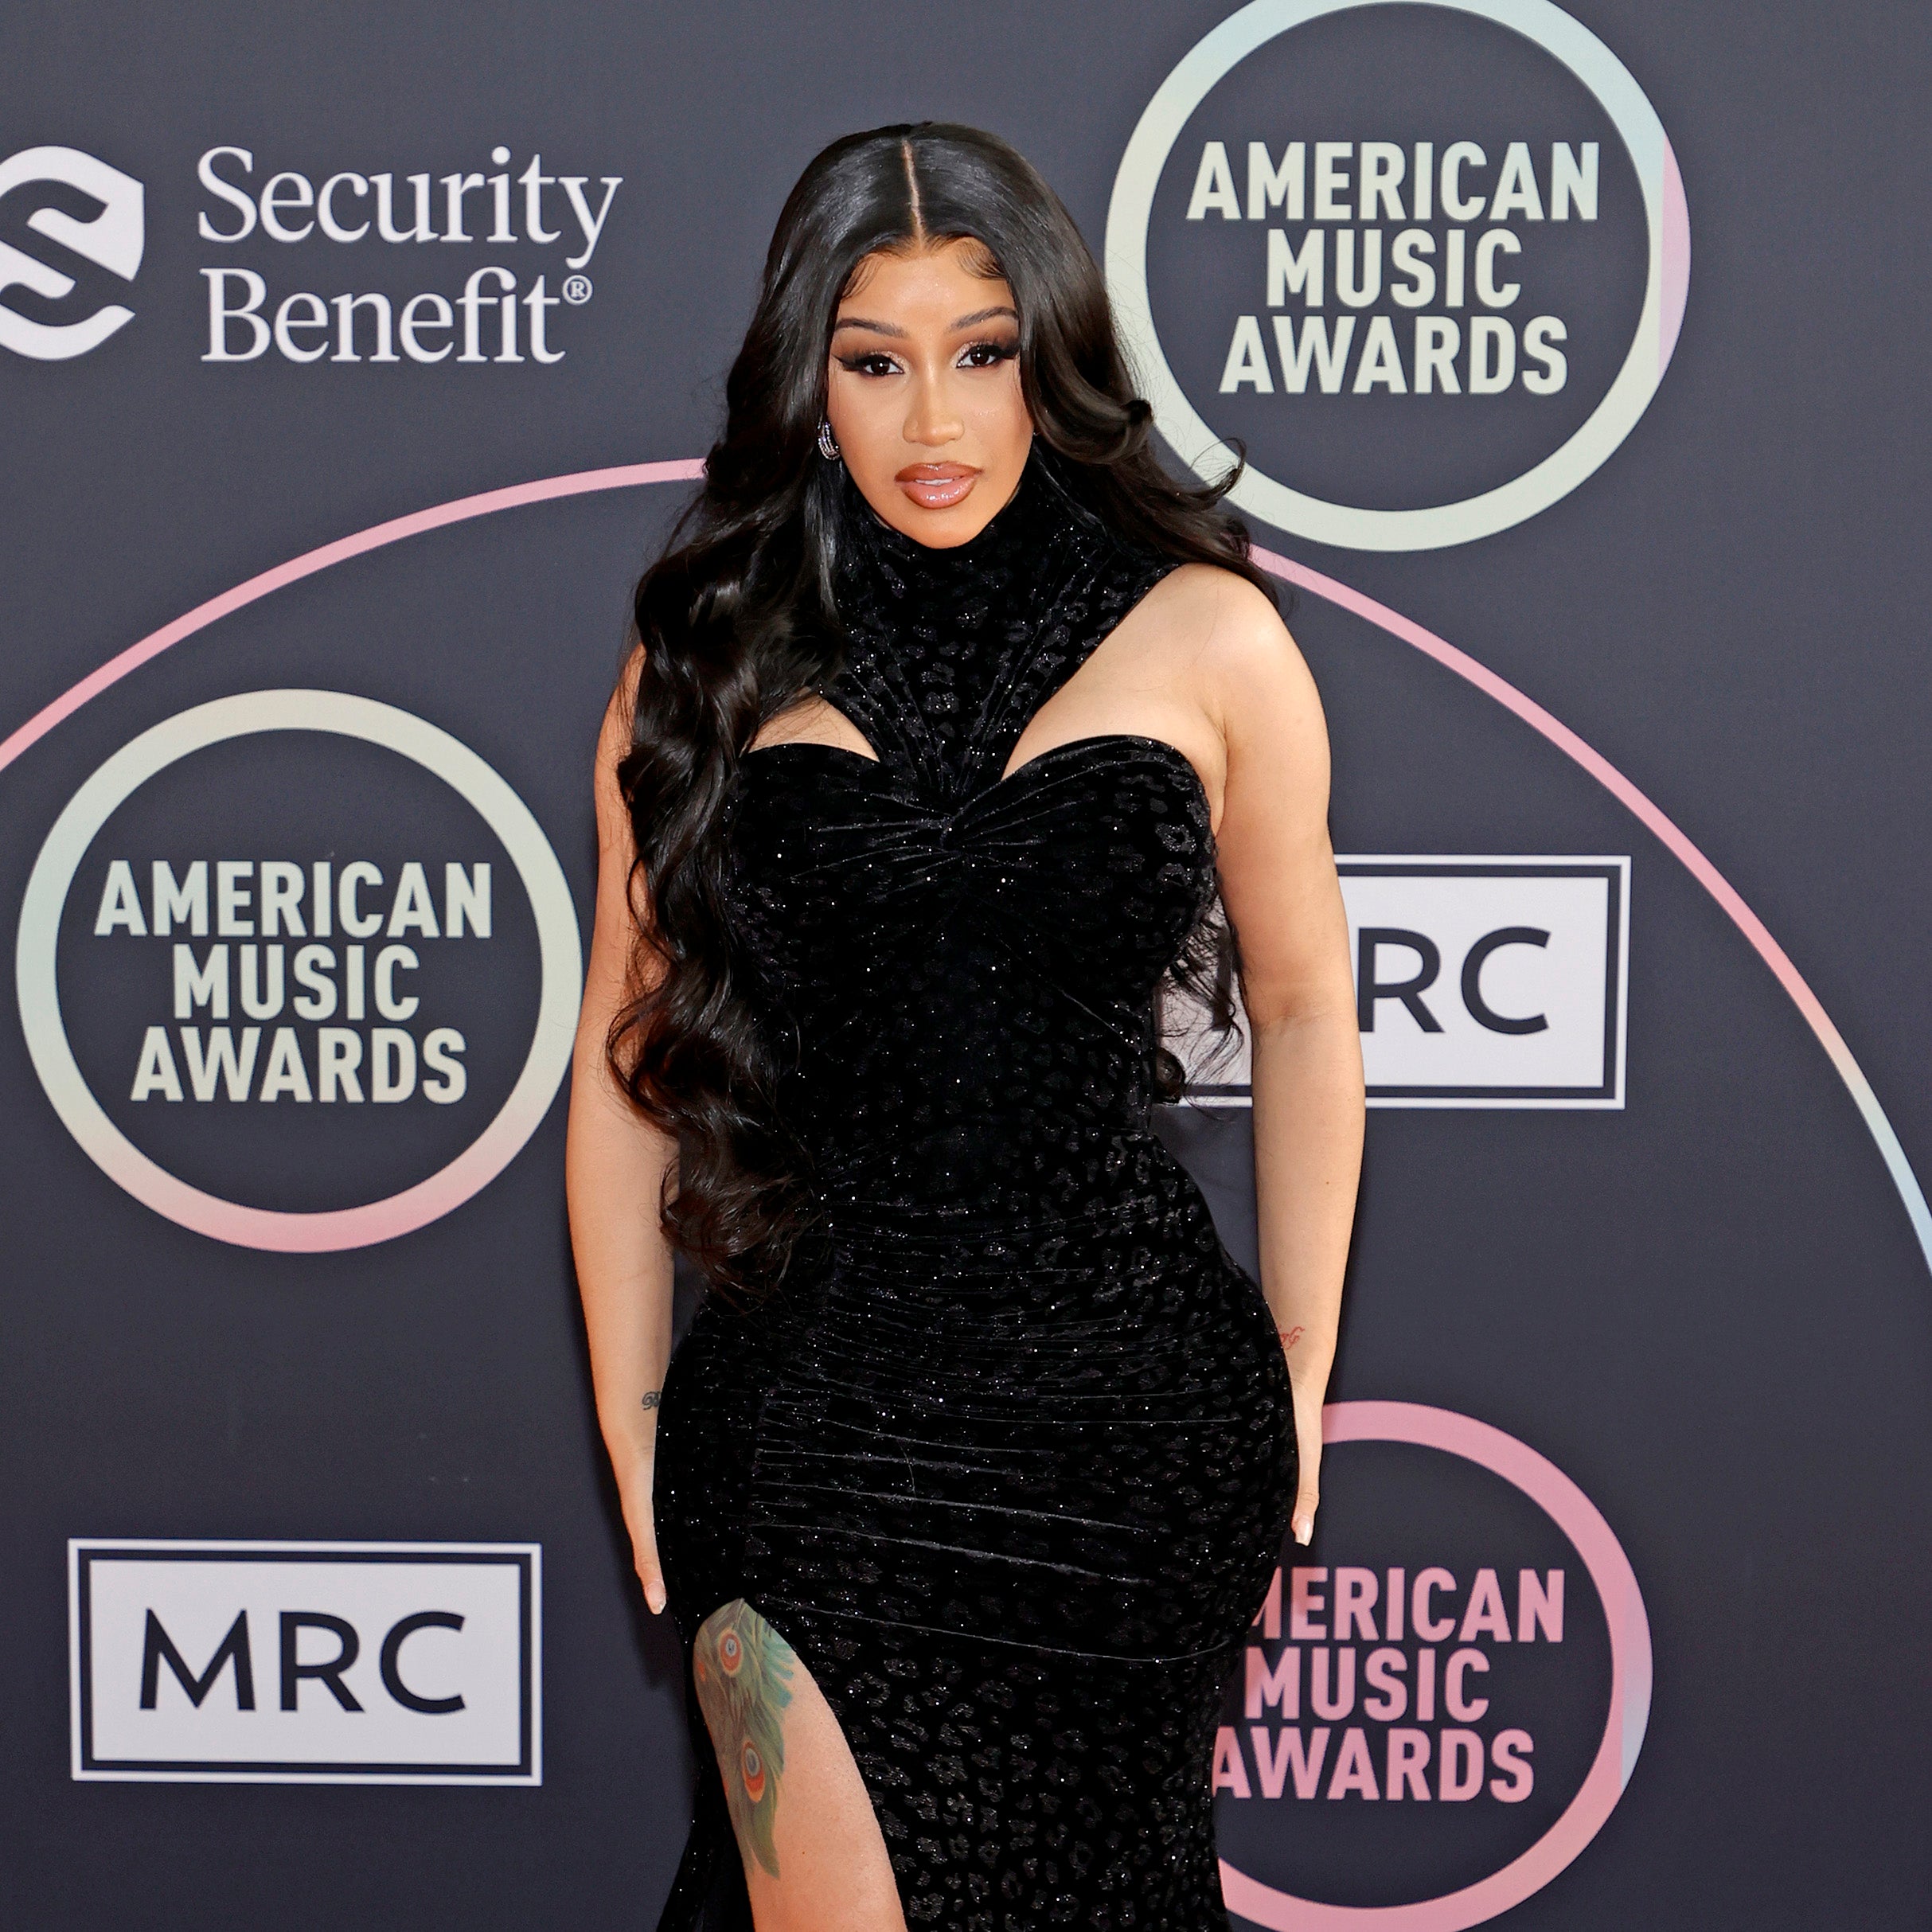 Cardi B On Hosting The American Music Awards Tonight: ‘I’m Getting Too Nervous’